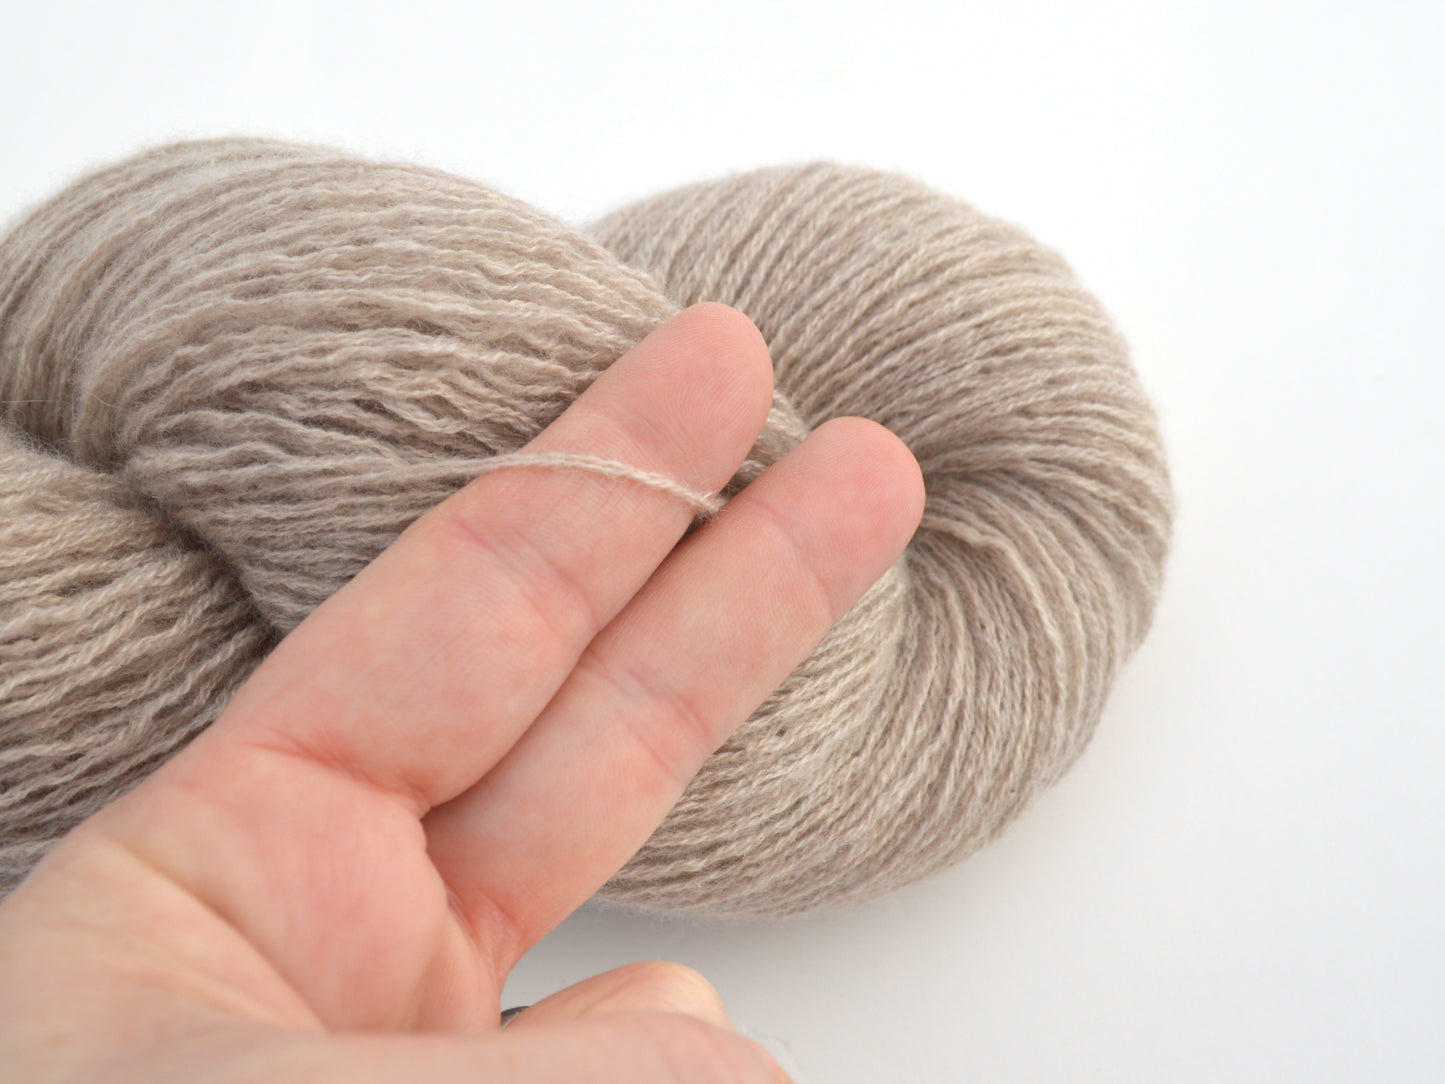 Heavy Lace Weight Recycled Cashmere Yarn in Oatmeal Beige